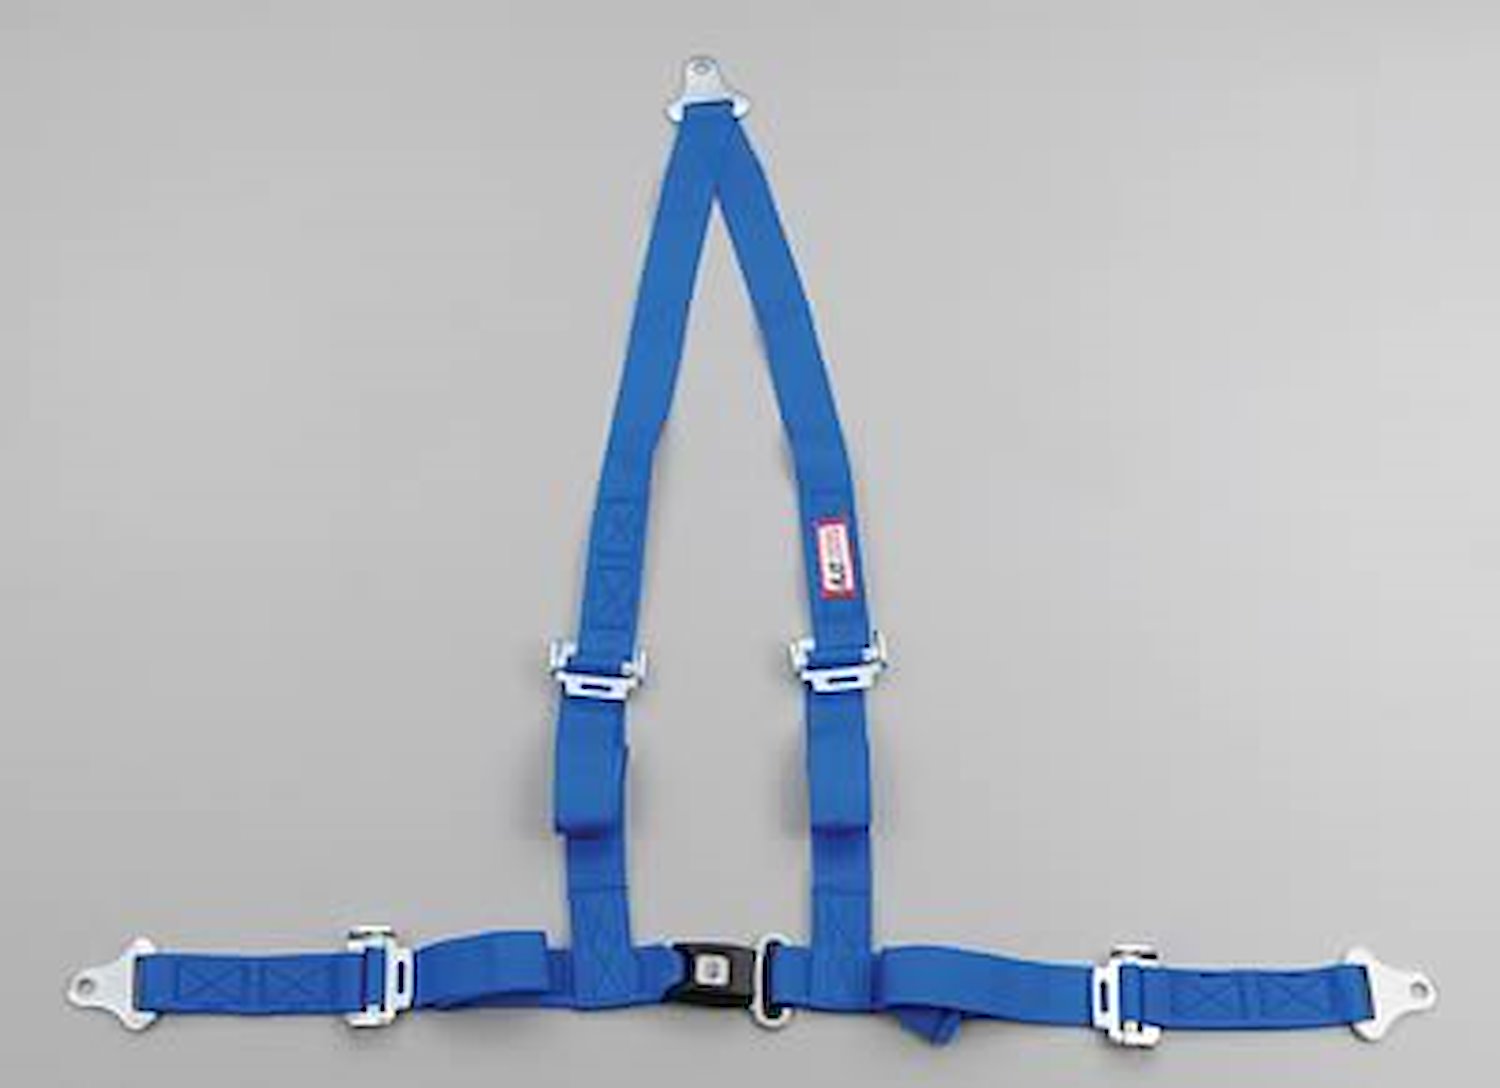 NON-SFI B&T HARNESS 2 PULL UP Lap Belt SNAP 2 S. H. Individual ROLL BAR Mount WRAP/SNAP w/STERNUM STRAP BLUE